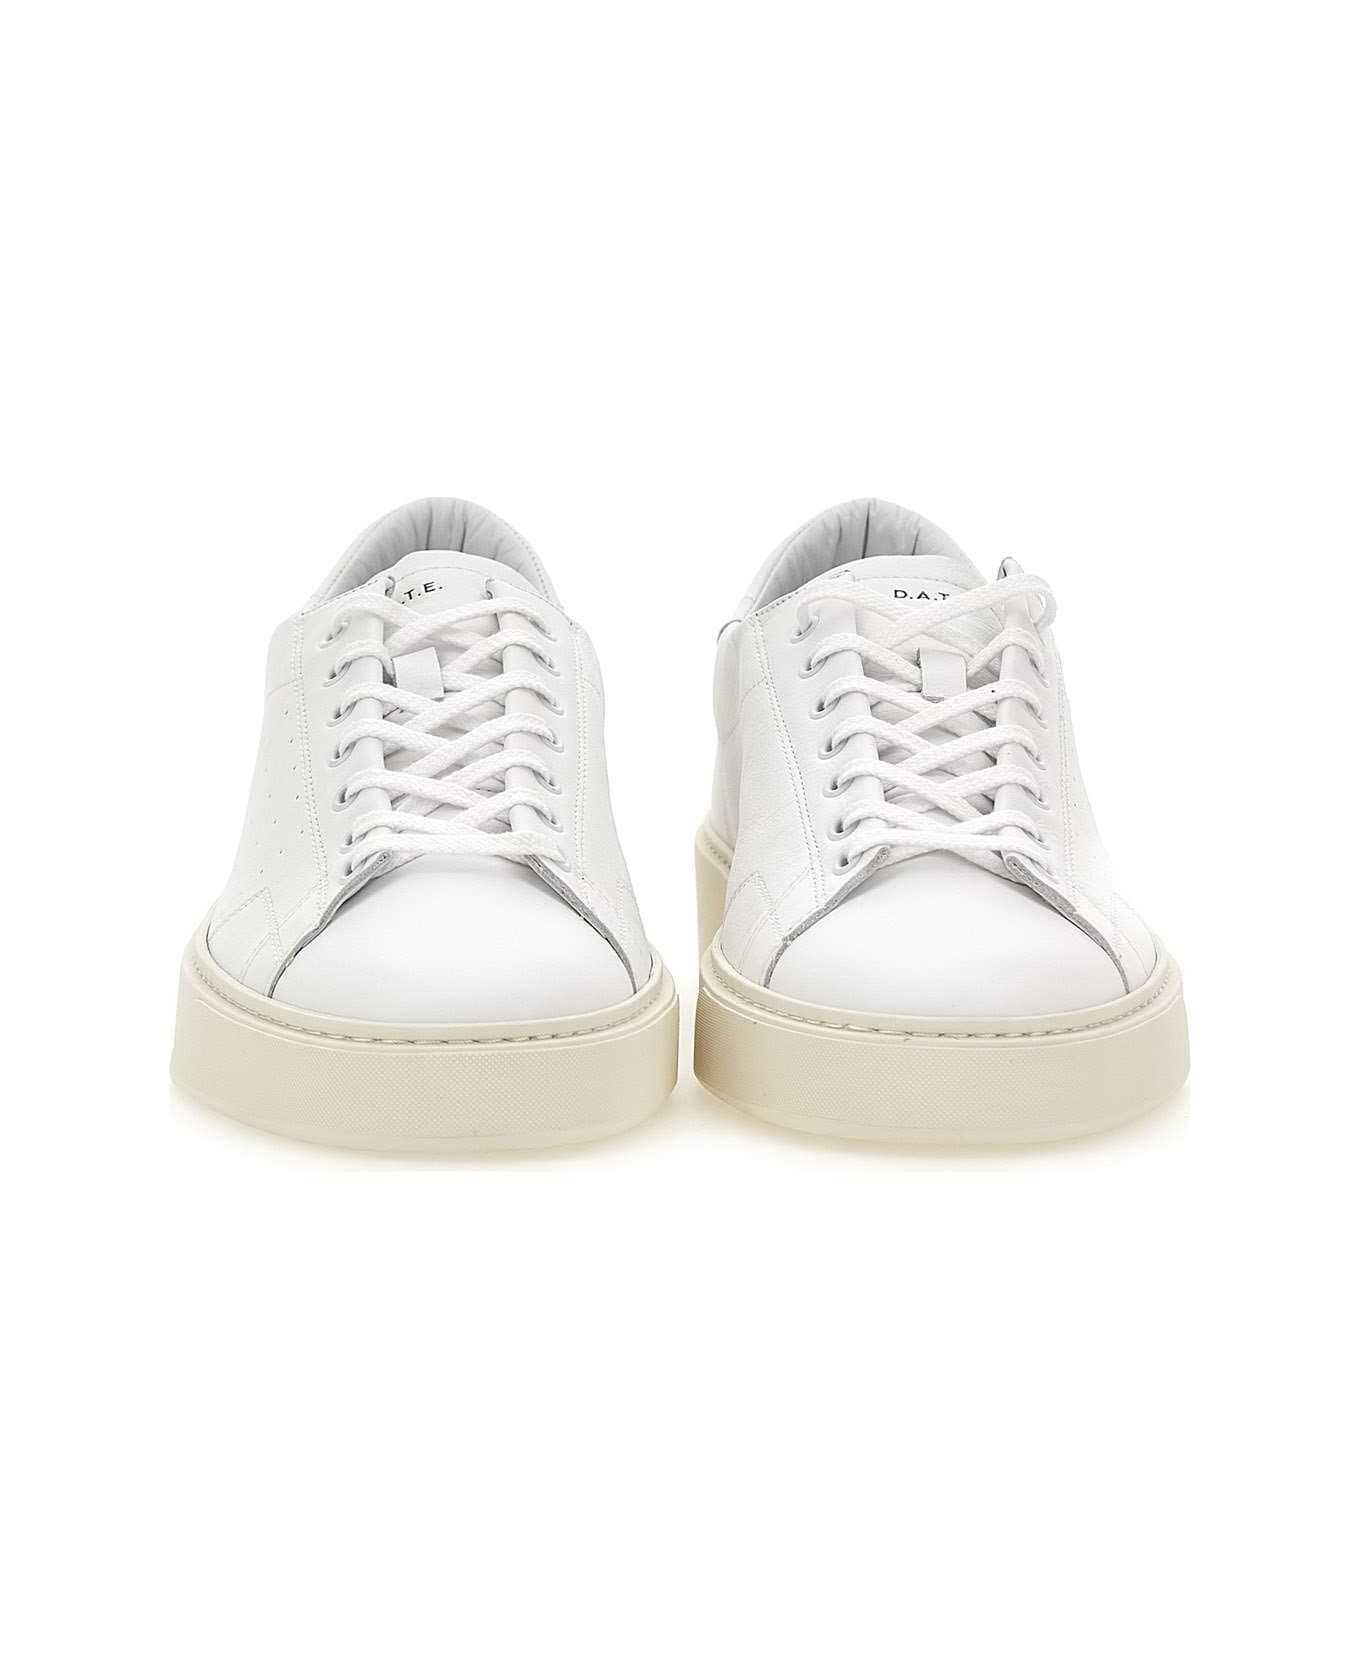 D.A.T.E. "levante" Leather Sneakers - WHITE スニーカー